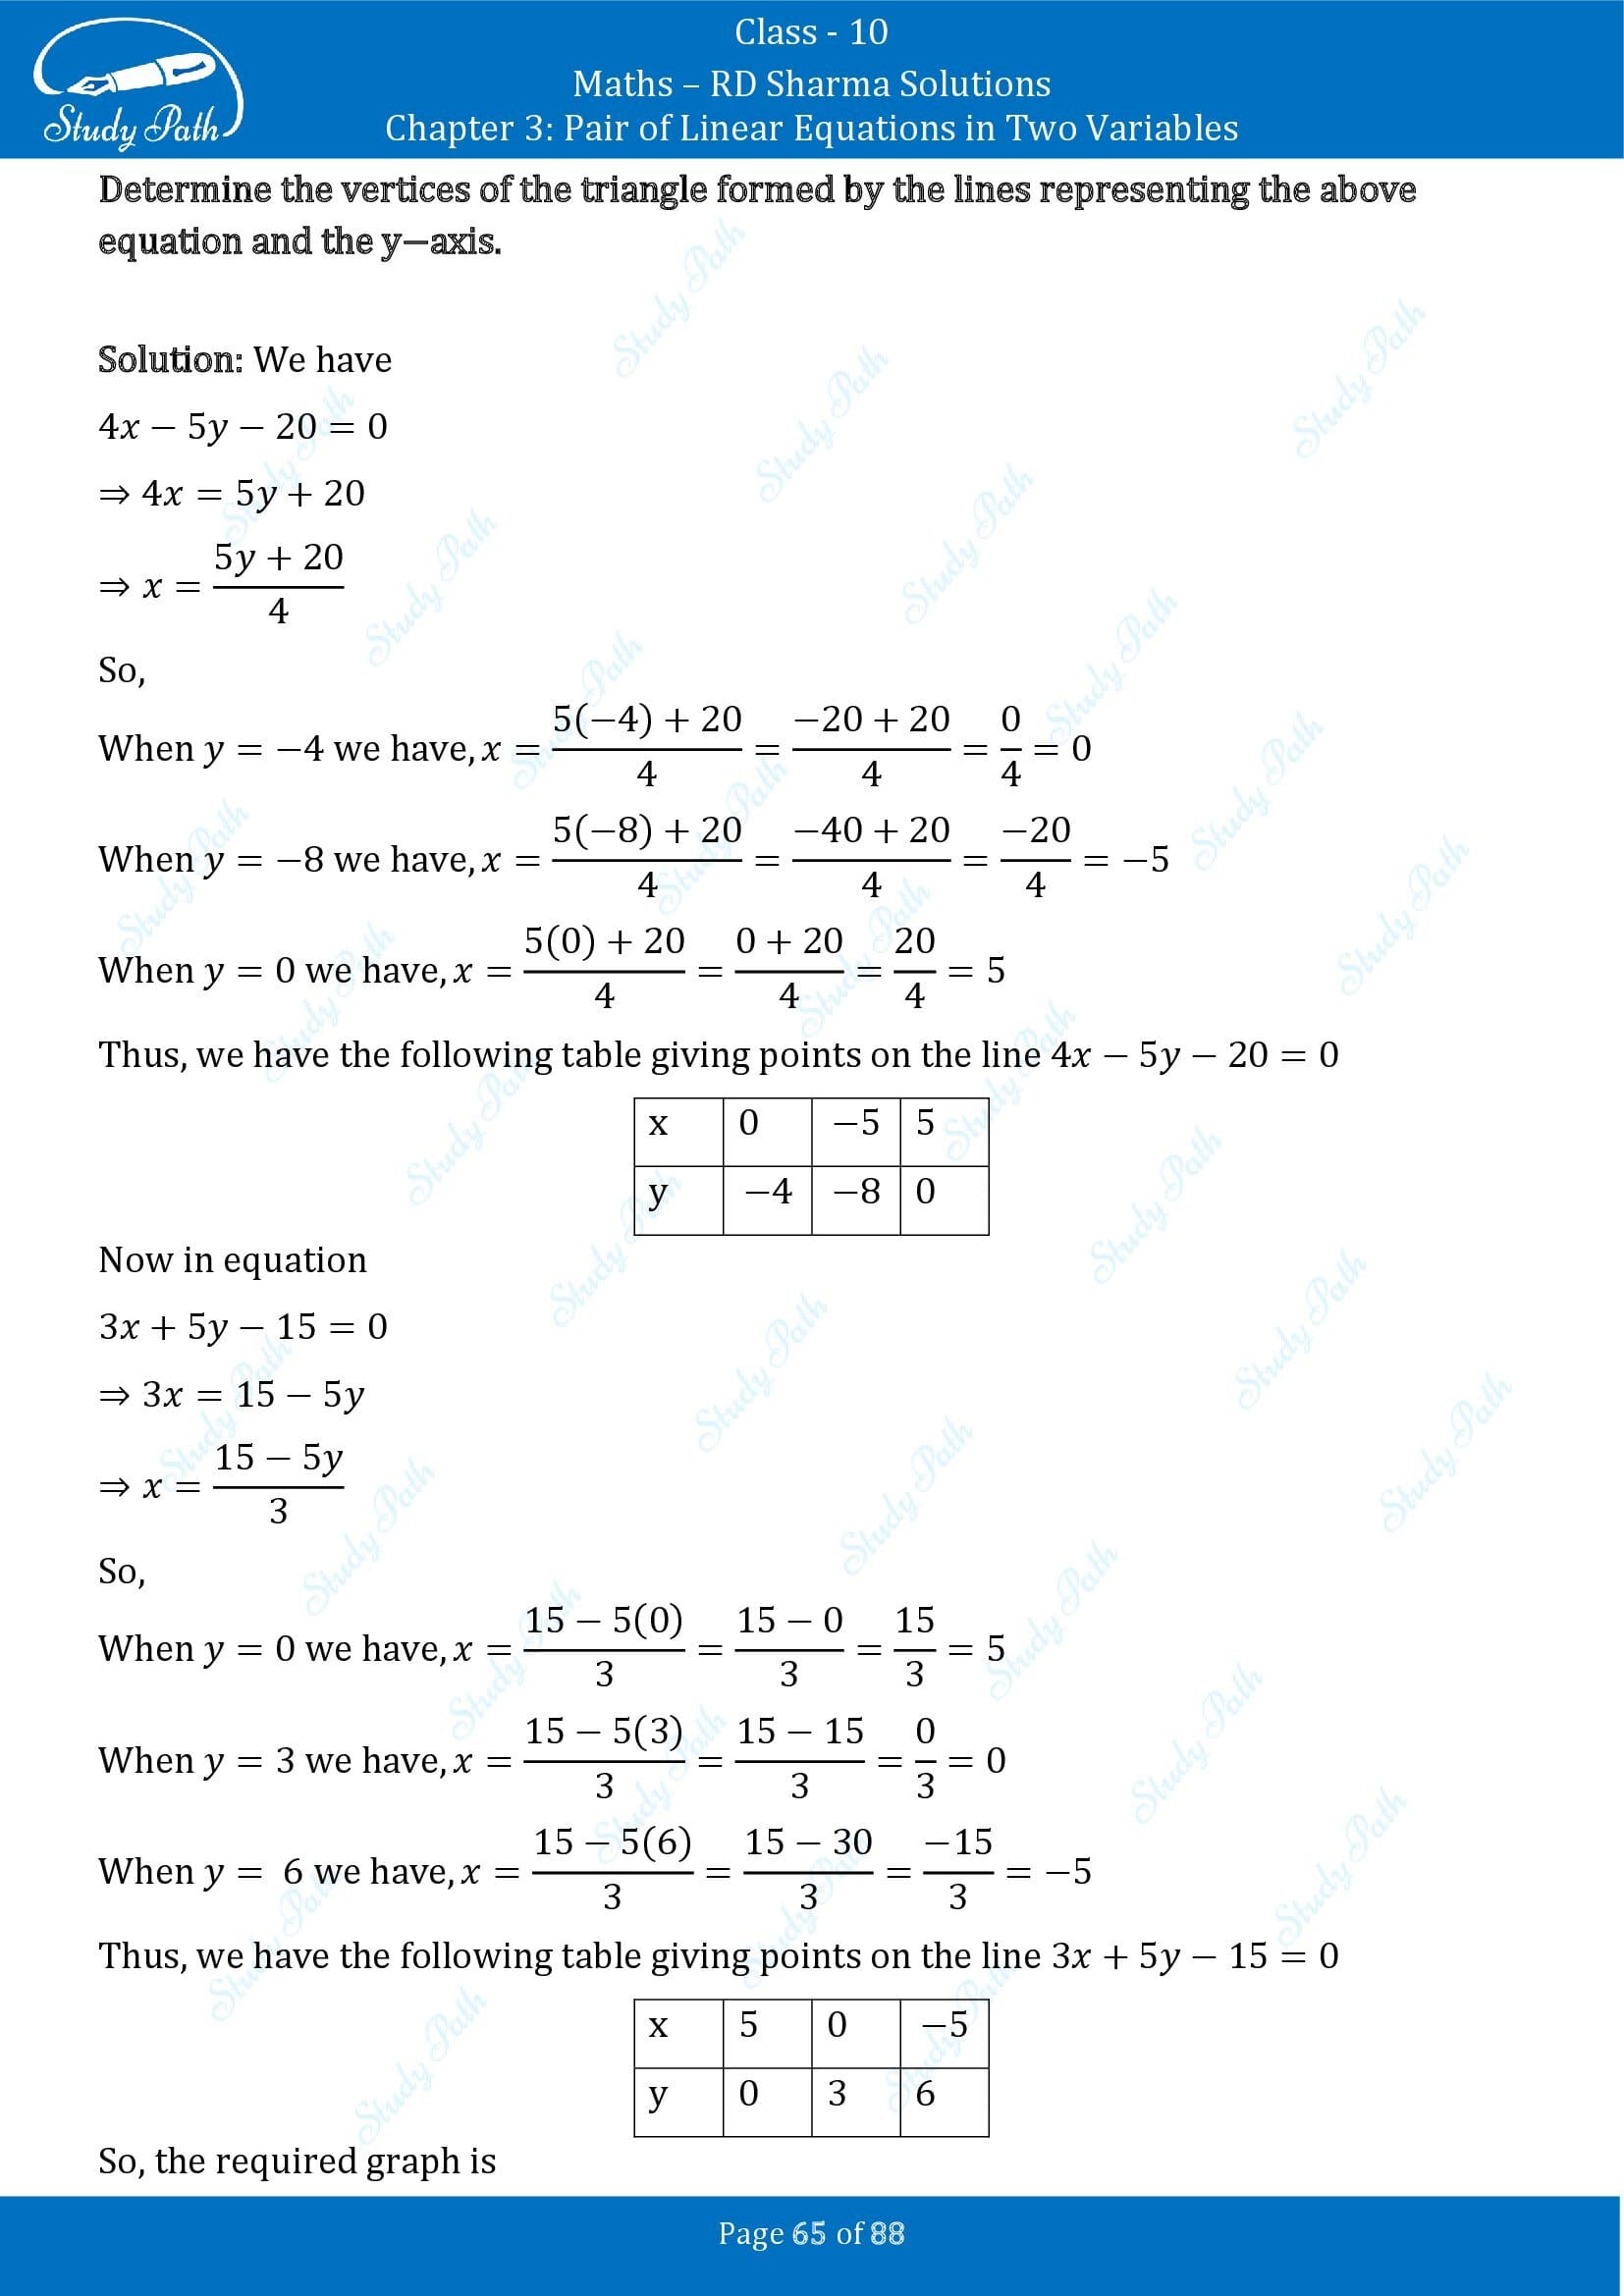 RD Sharma Solutions Class 10 Chapter 3 Pair of Linear Equations in Two Variables Exercise 3.2 00065